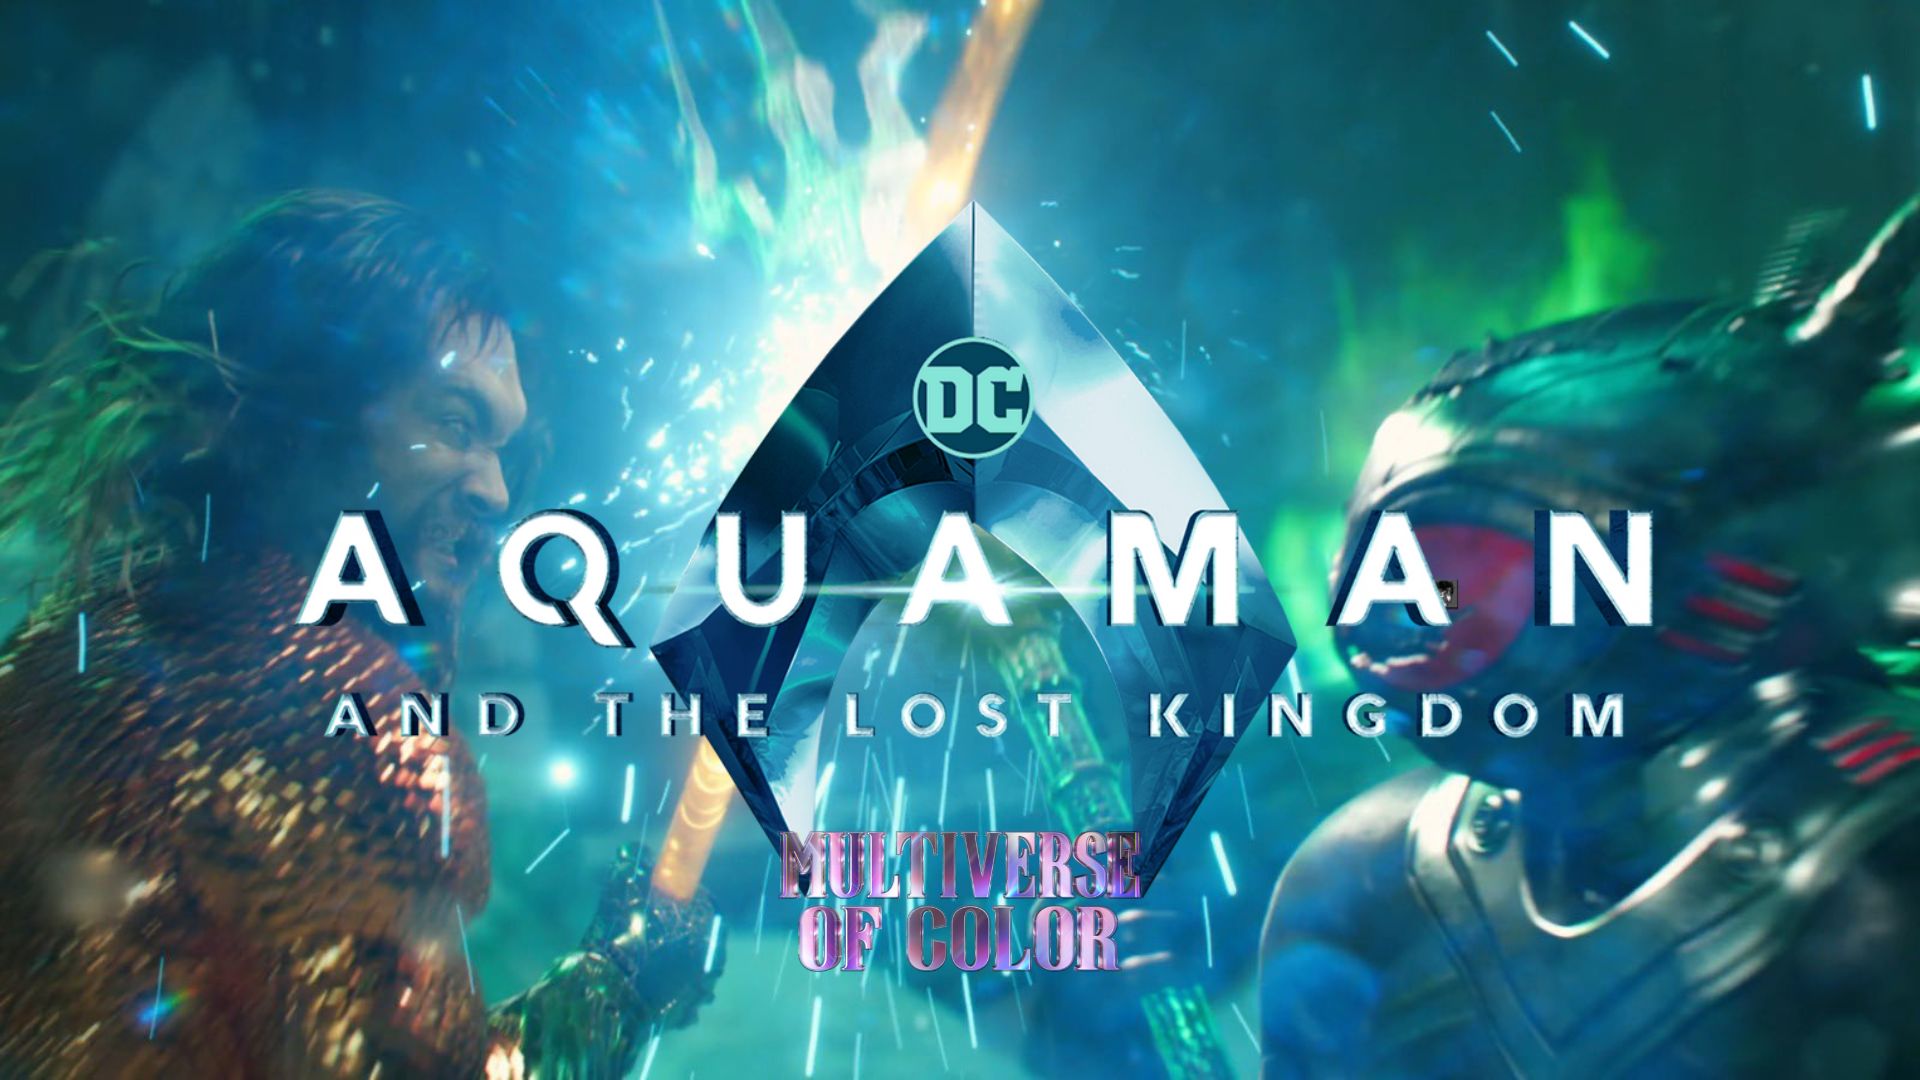 Finally, The First Aquaman And The Lost Kingdom Is Here